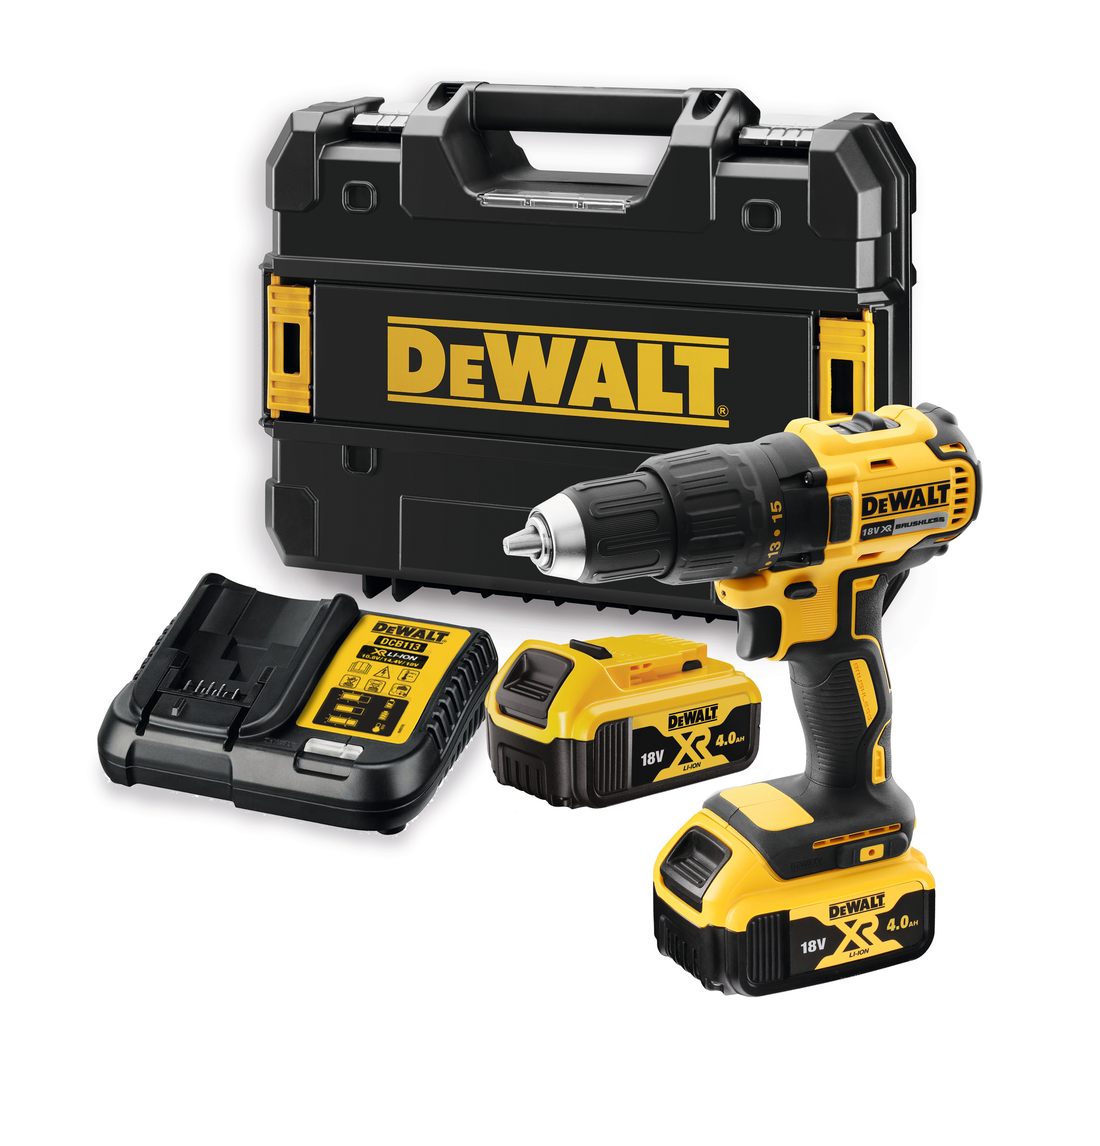 POWER DRILL DEWALT BRUSHLESS WITH 2 BATTERIES 4AH WITH 30-PIECE SET